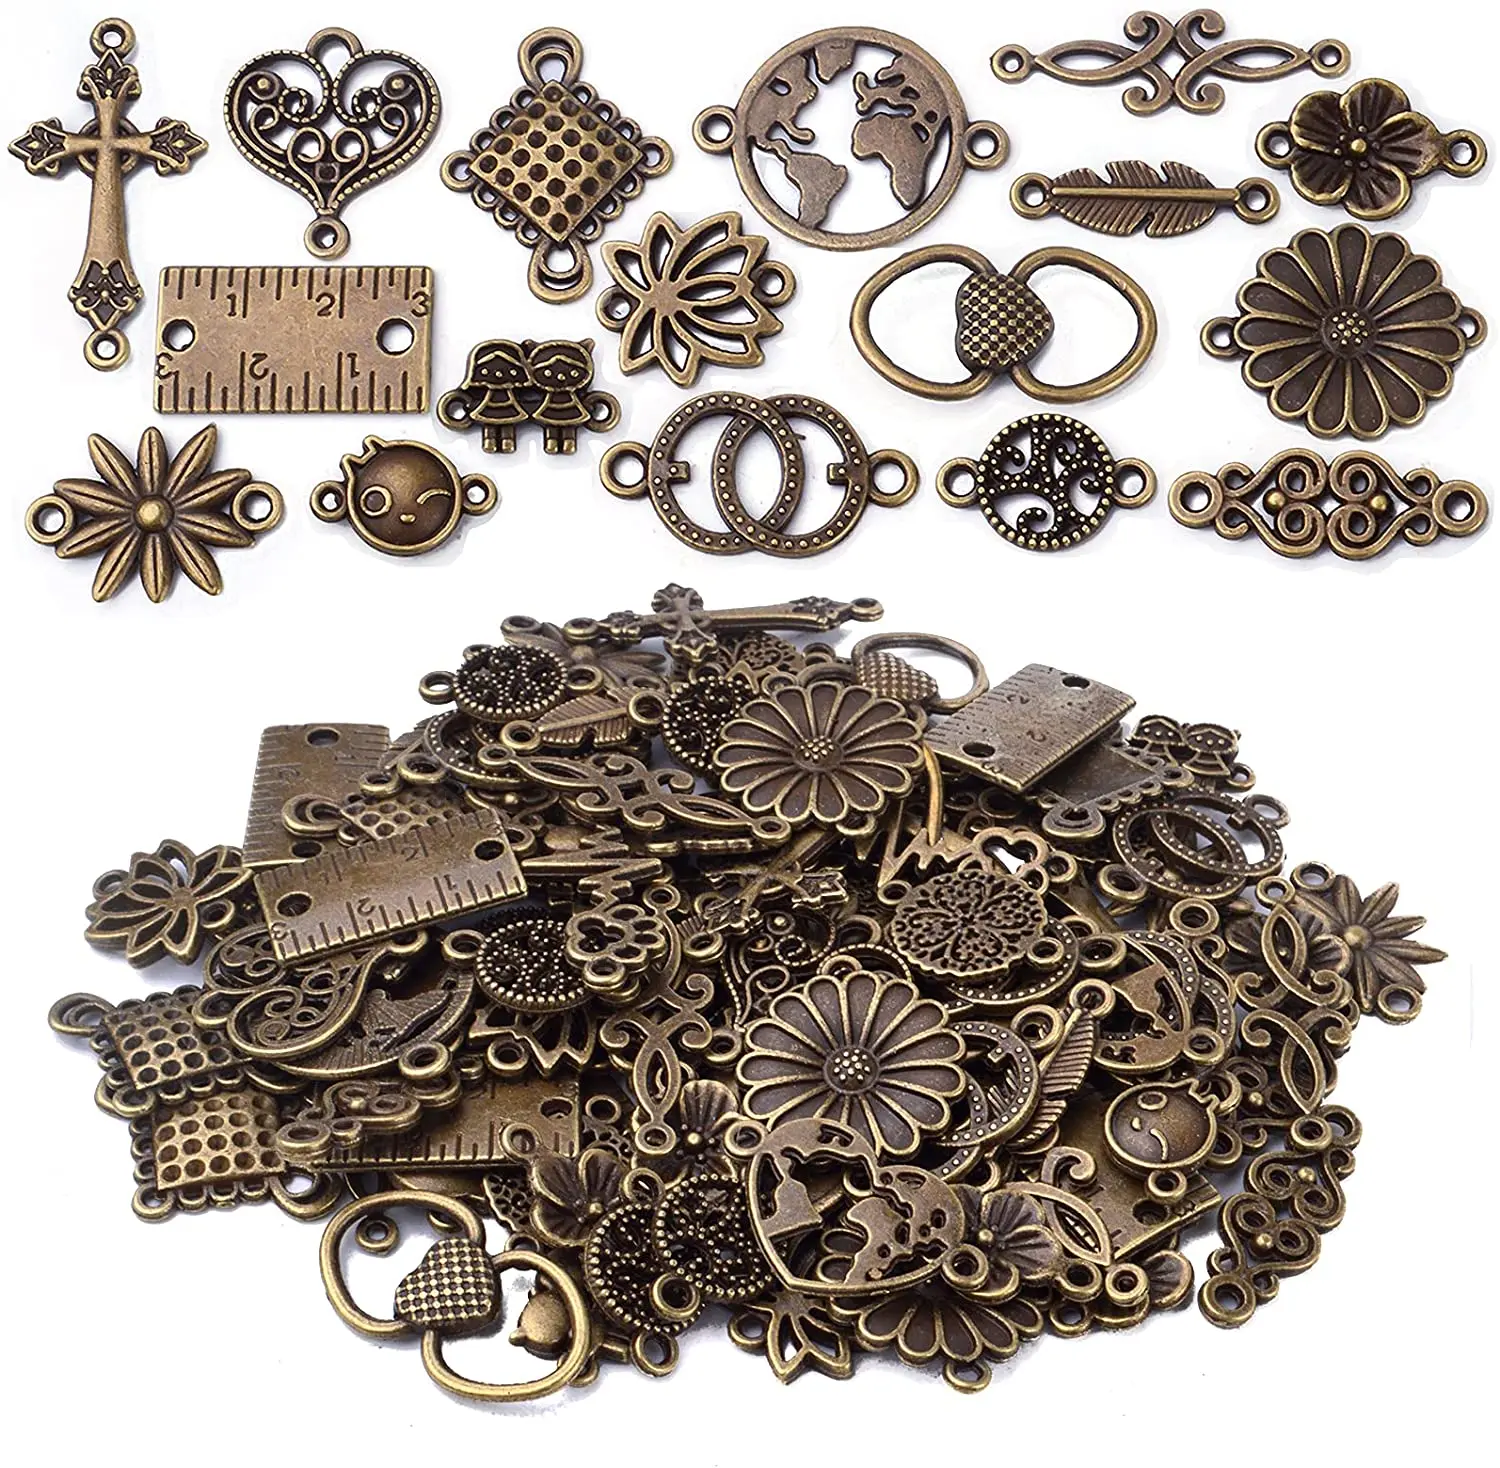 

100g Antique Bronze Flower Leaf Heart Cross Ruler Charms Bracelet Connector Links for DIY Necklace Earrings Jewelry Making